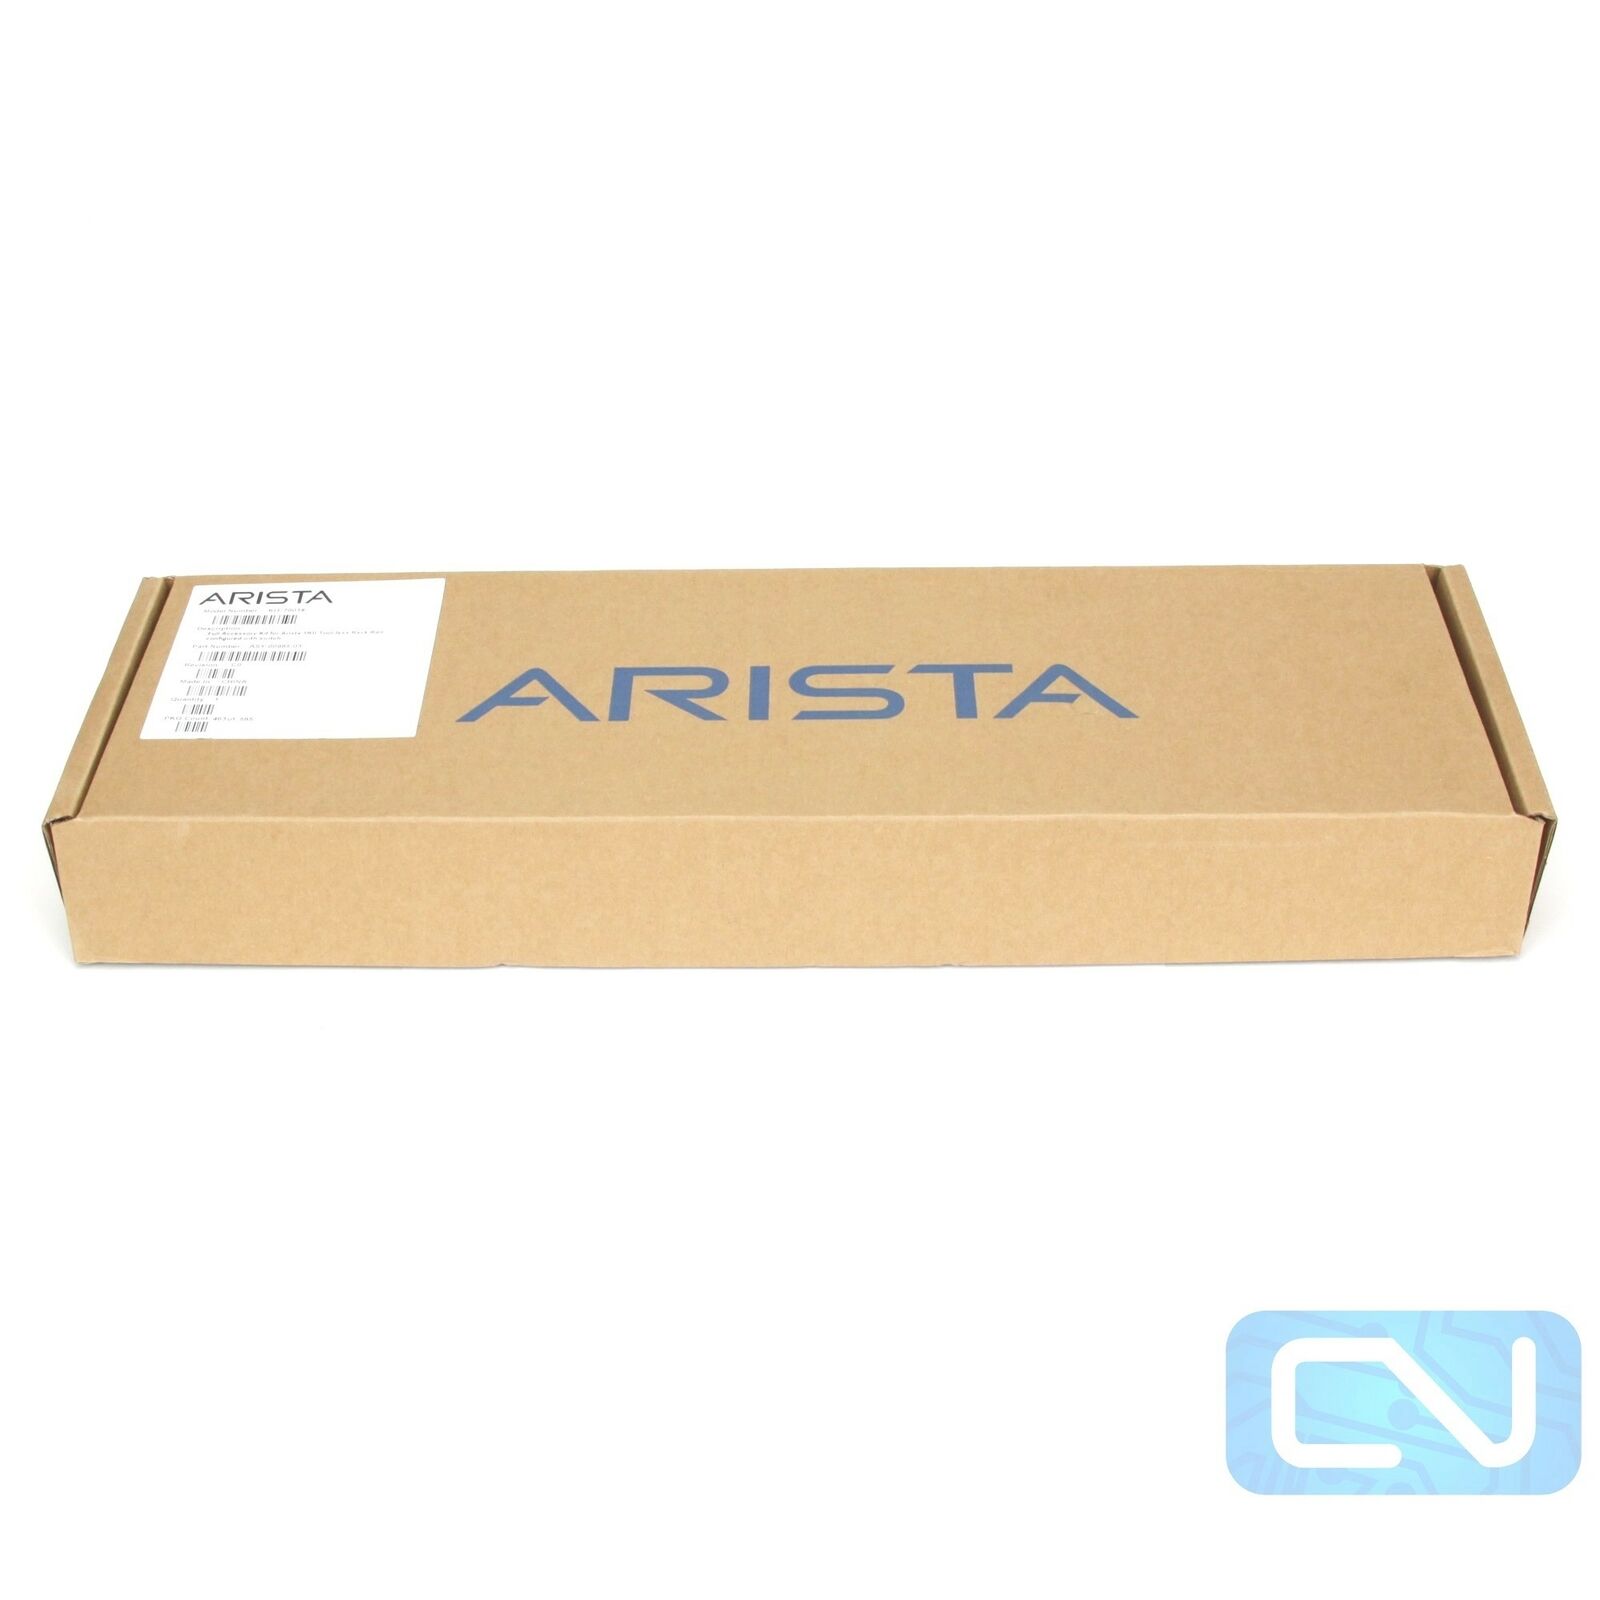 Arista KIT-7001# ASY-00985-03 Accessory Rail Kit Tool-Less W/ Cables No Slide